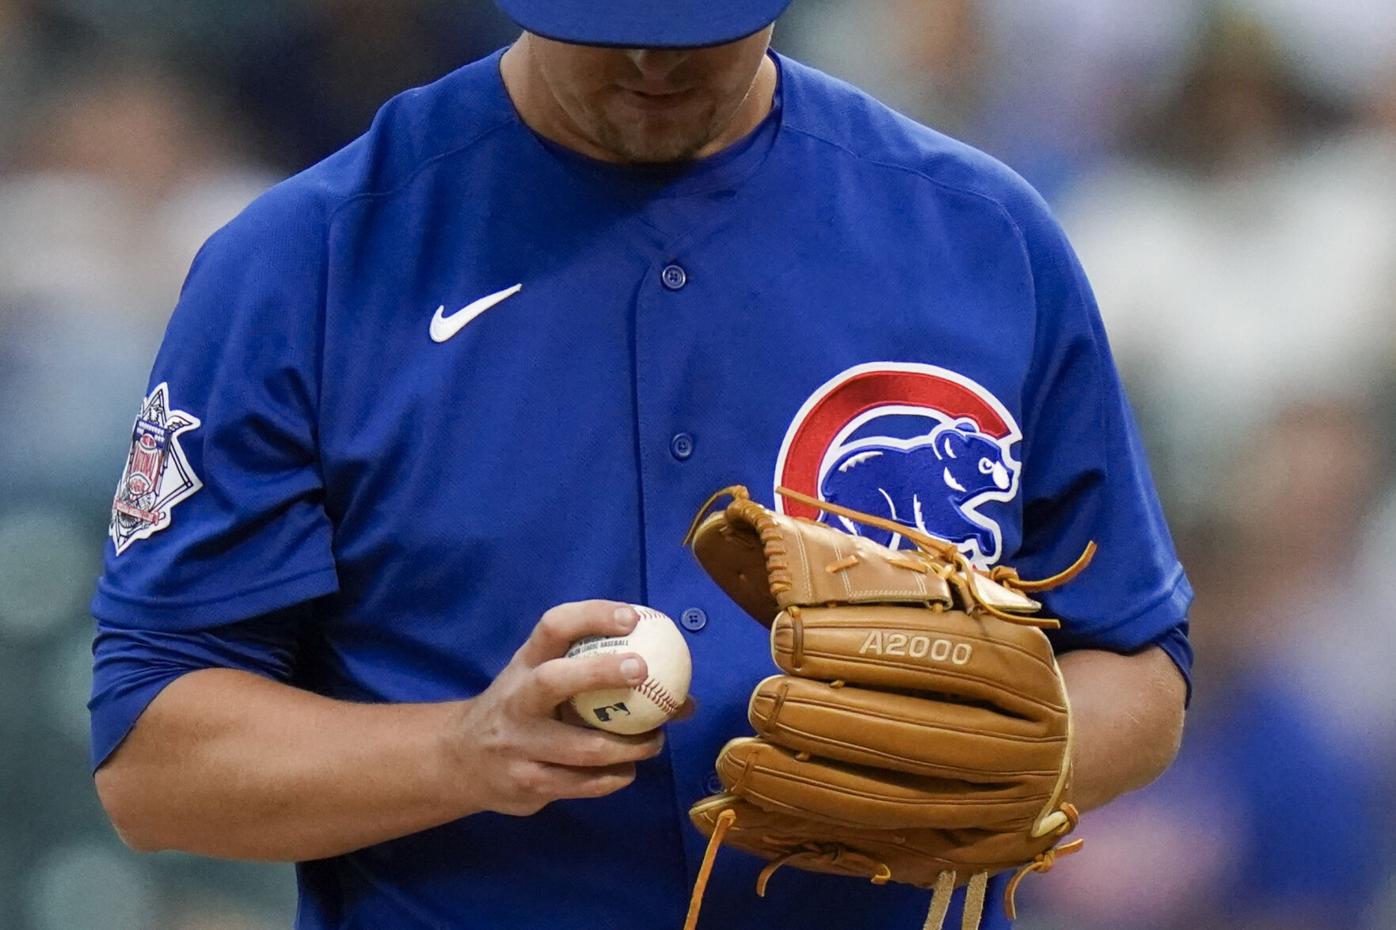 MLB commissioner suspects many pitchers are using banned sticky